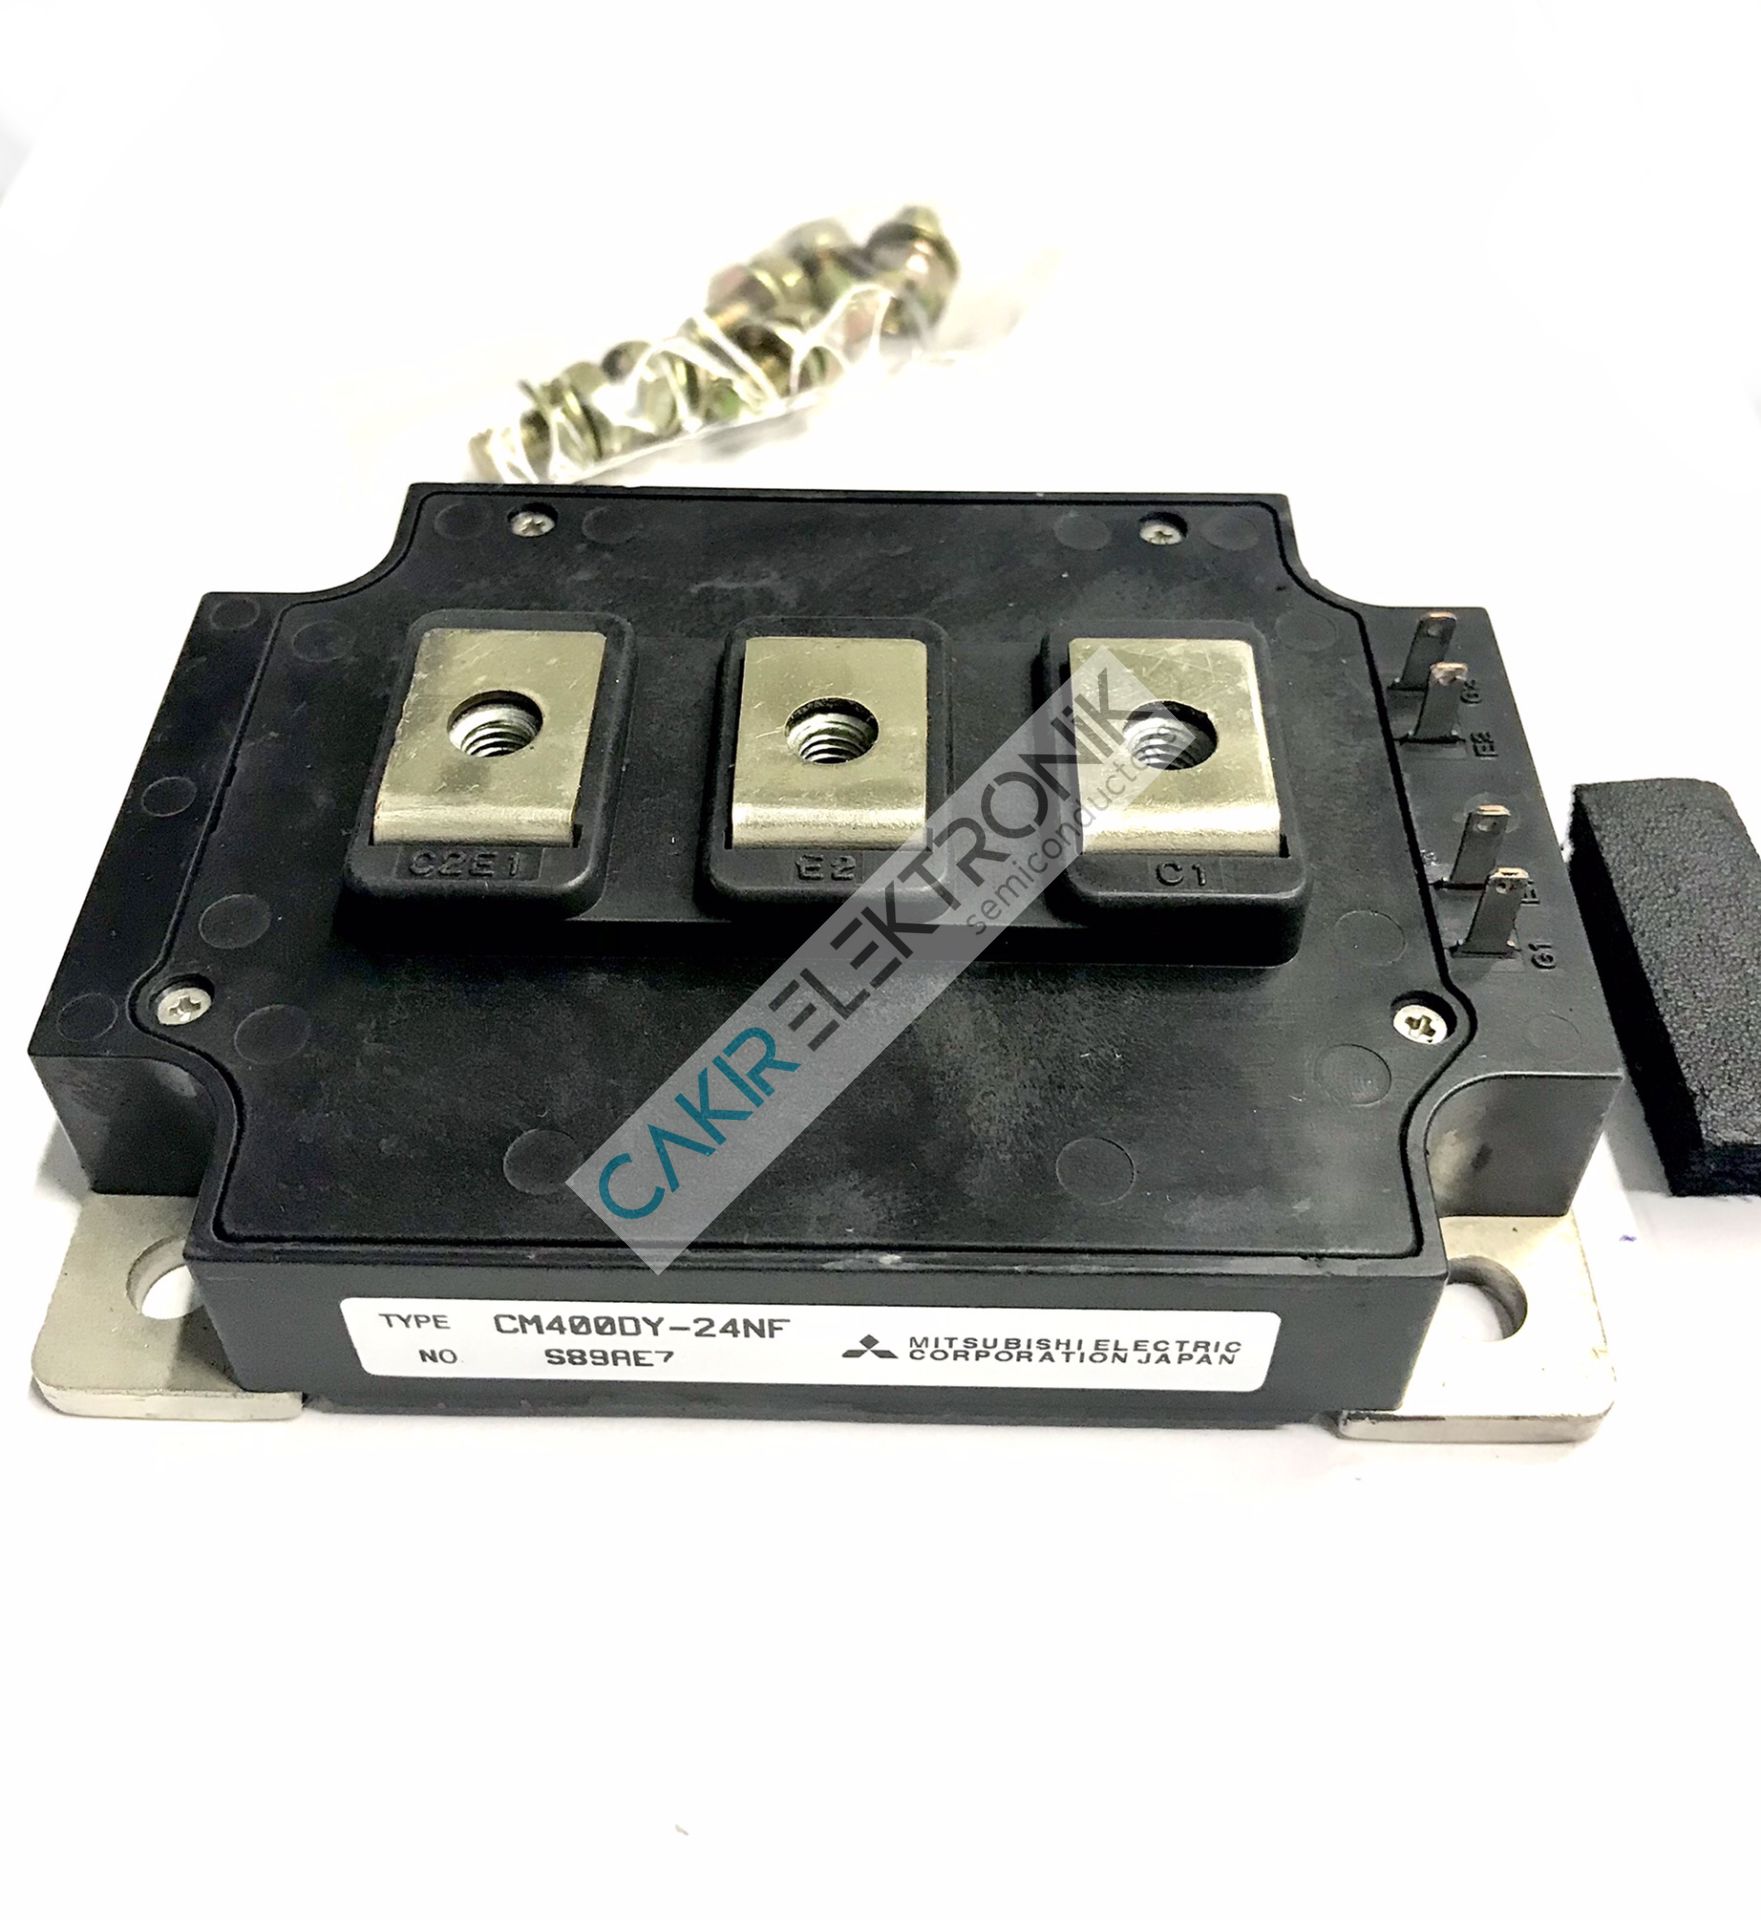 CM400DY-24NF - CM400DY24NF   IGBT MODULES HIGH POWER SWITCHING USE